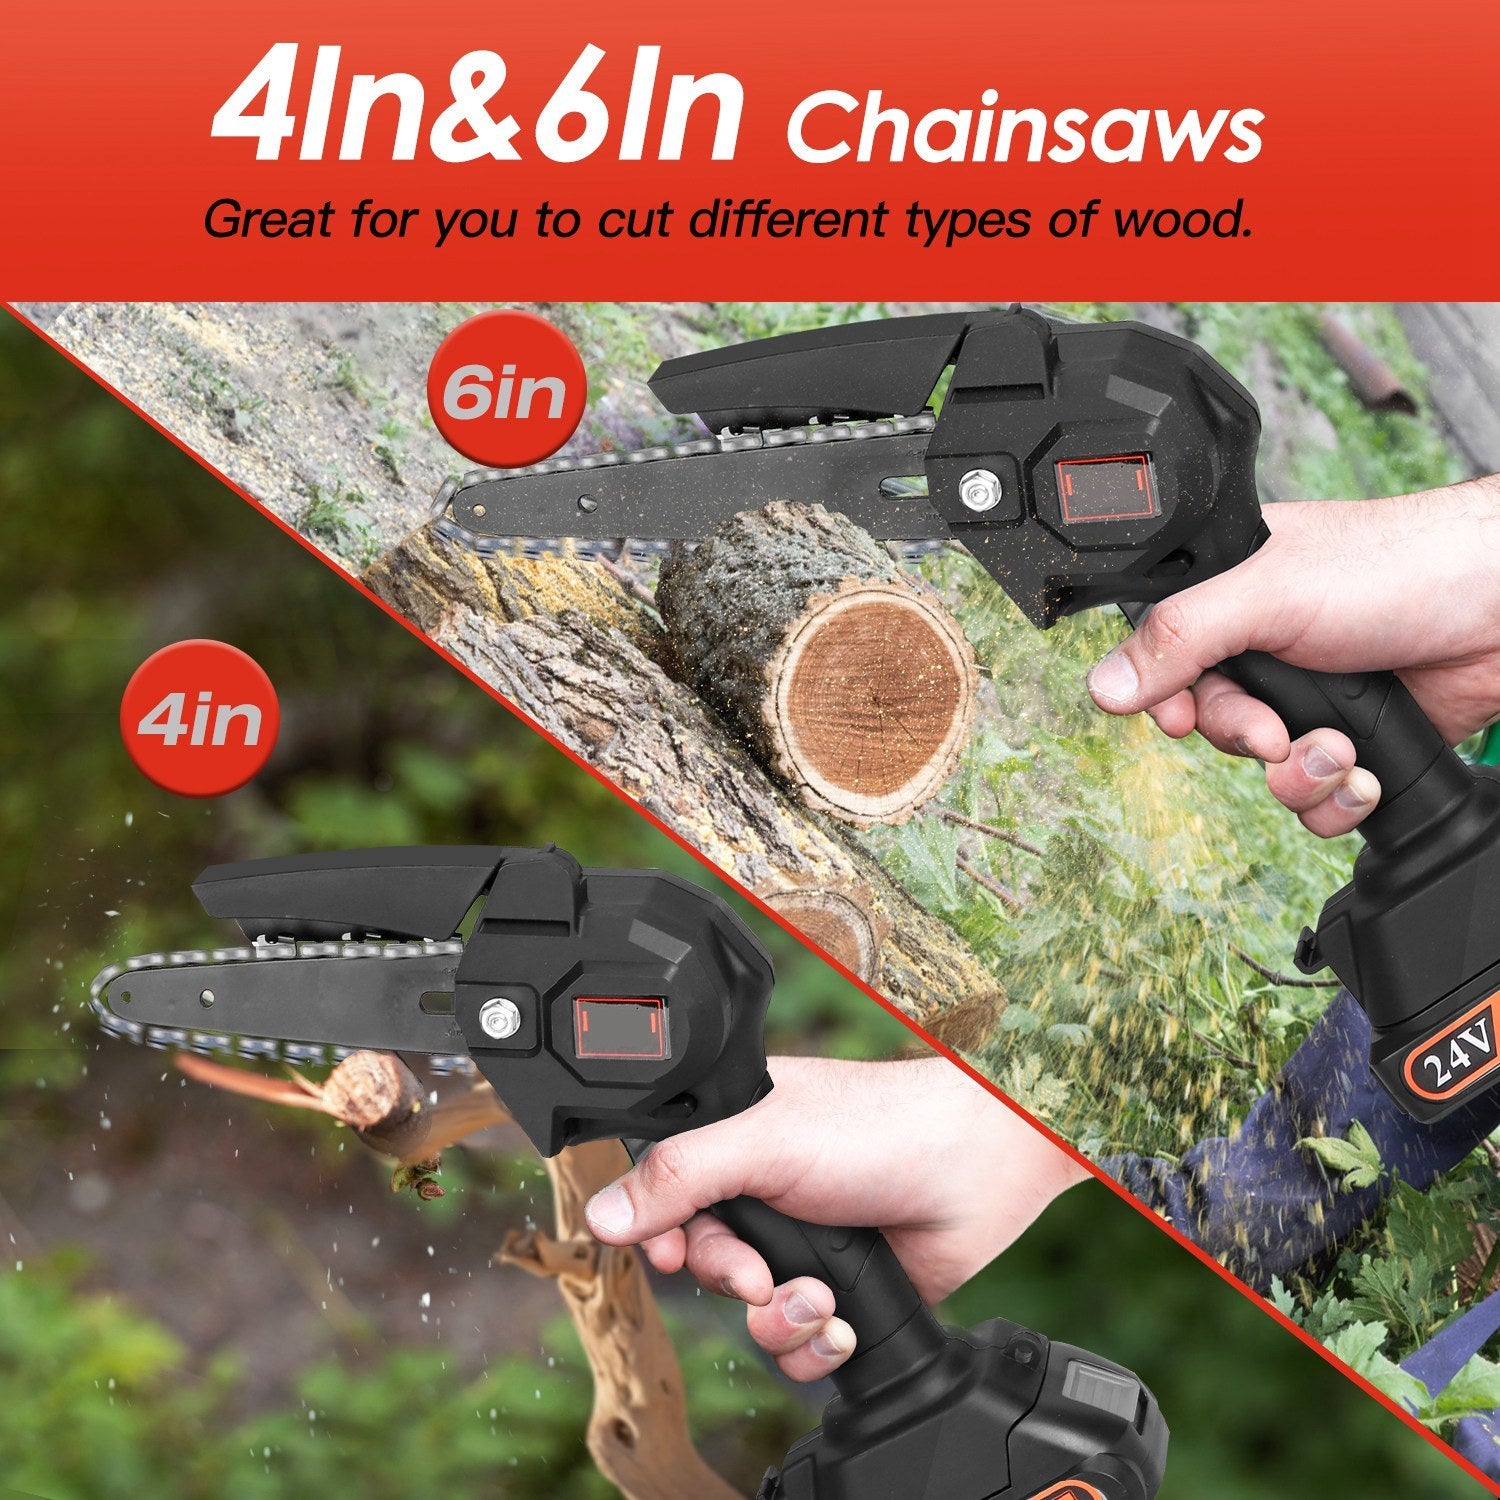 2-in-1 Cordless Pole Saw and Small Chainsaw